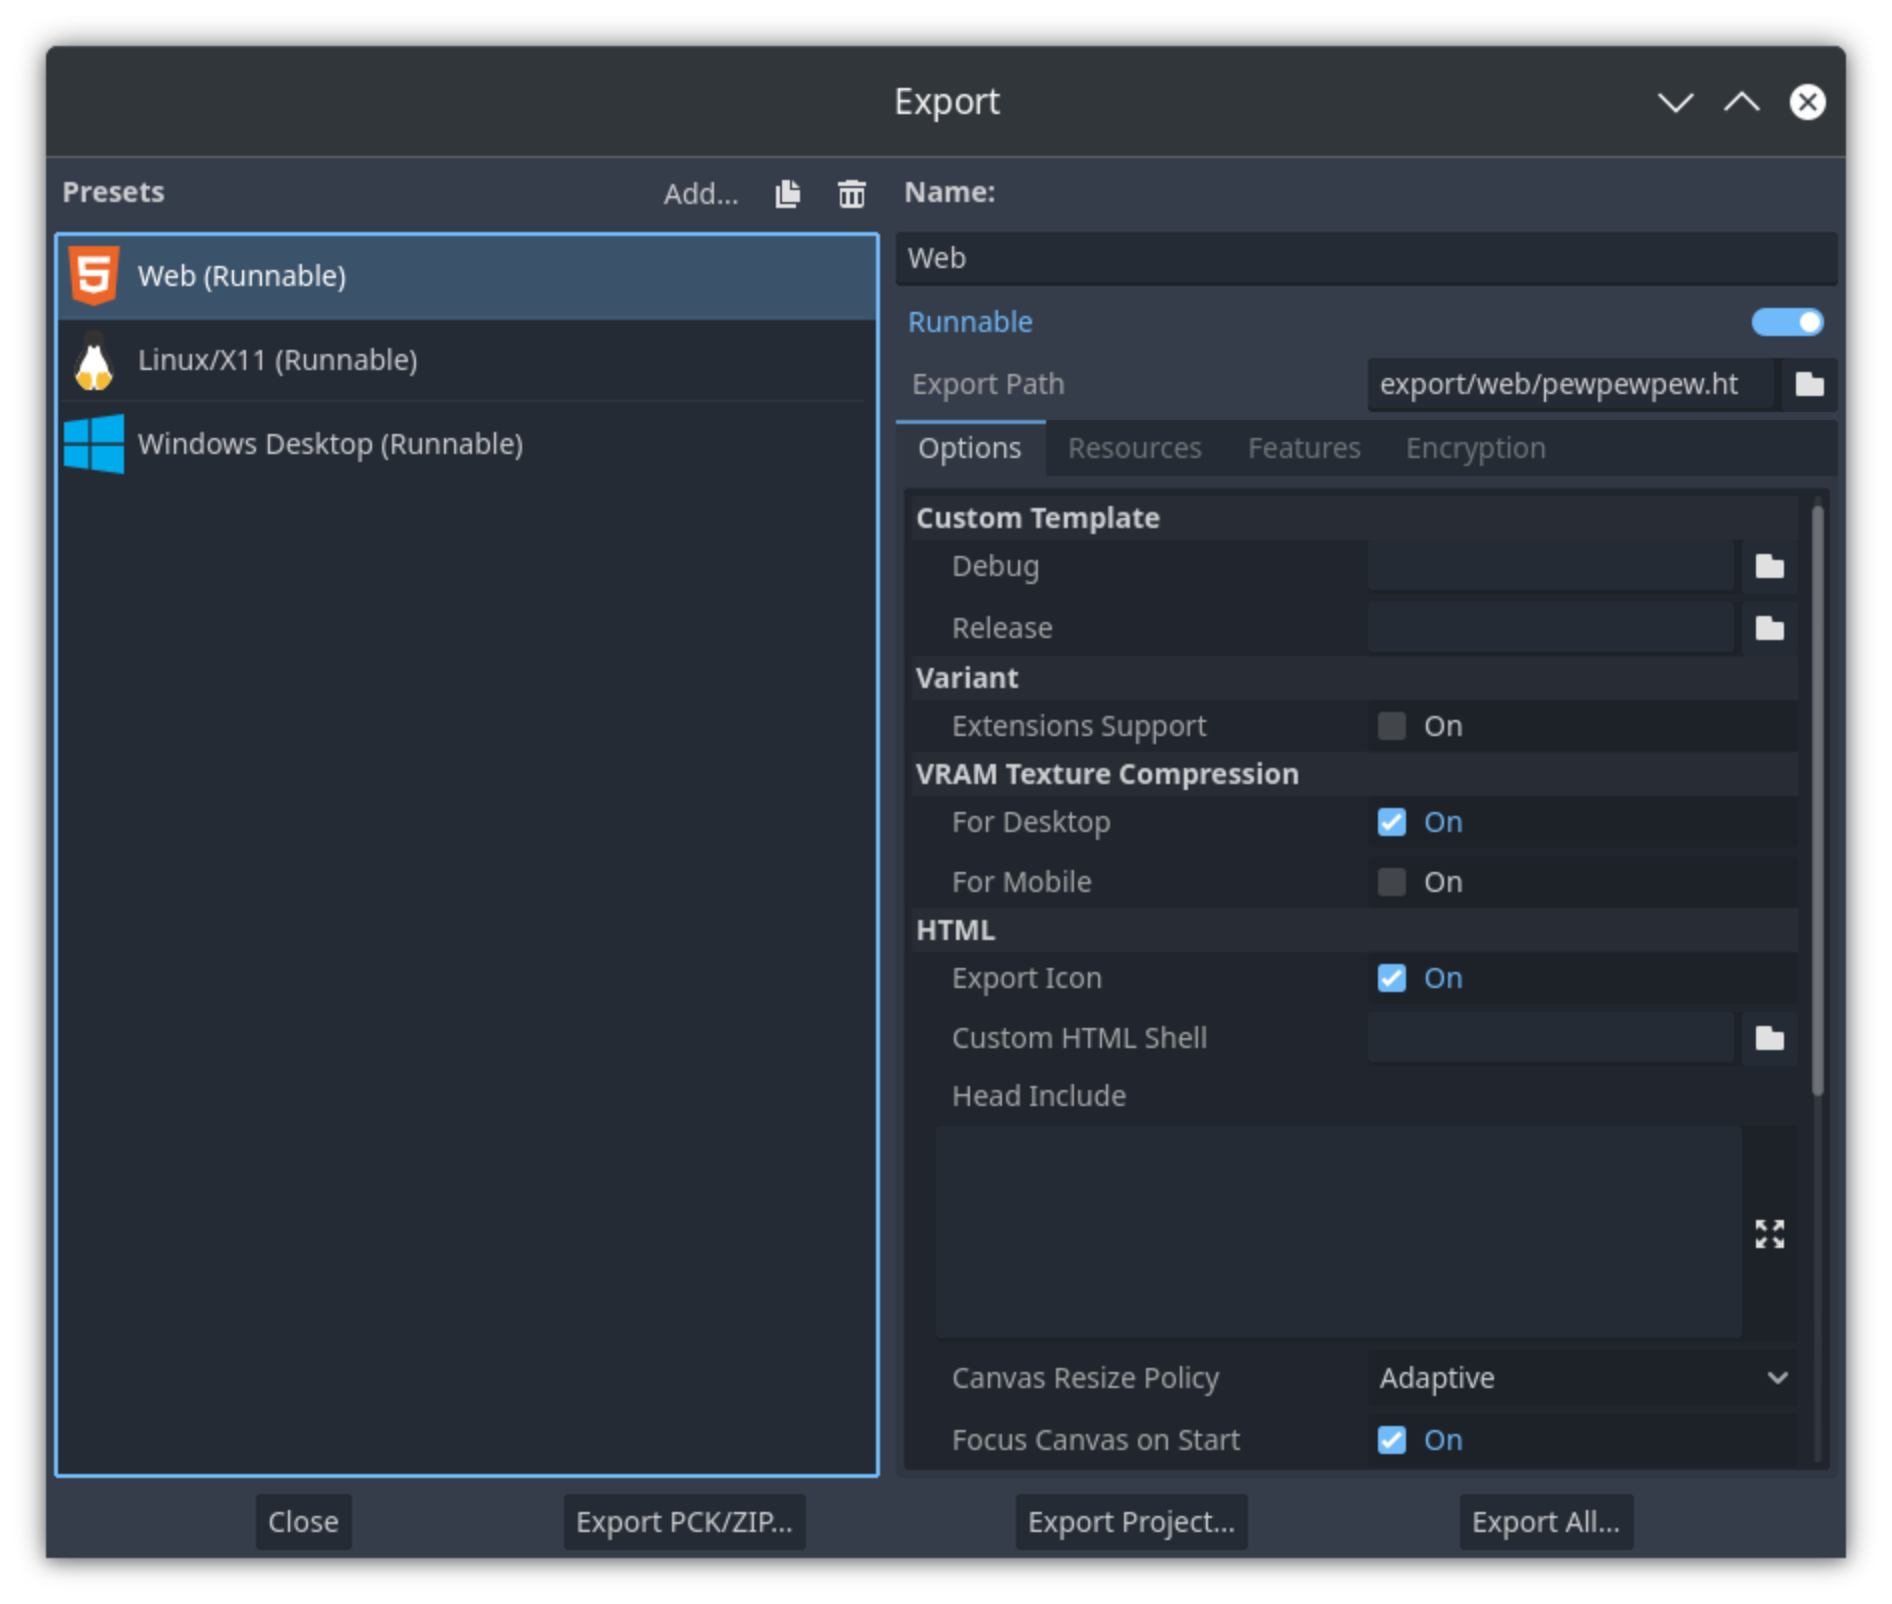 The export dialog of the Godot Engine 4 editor with the Web export template selected